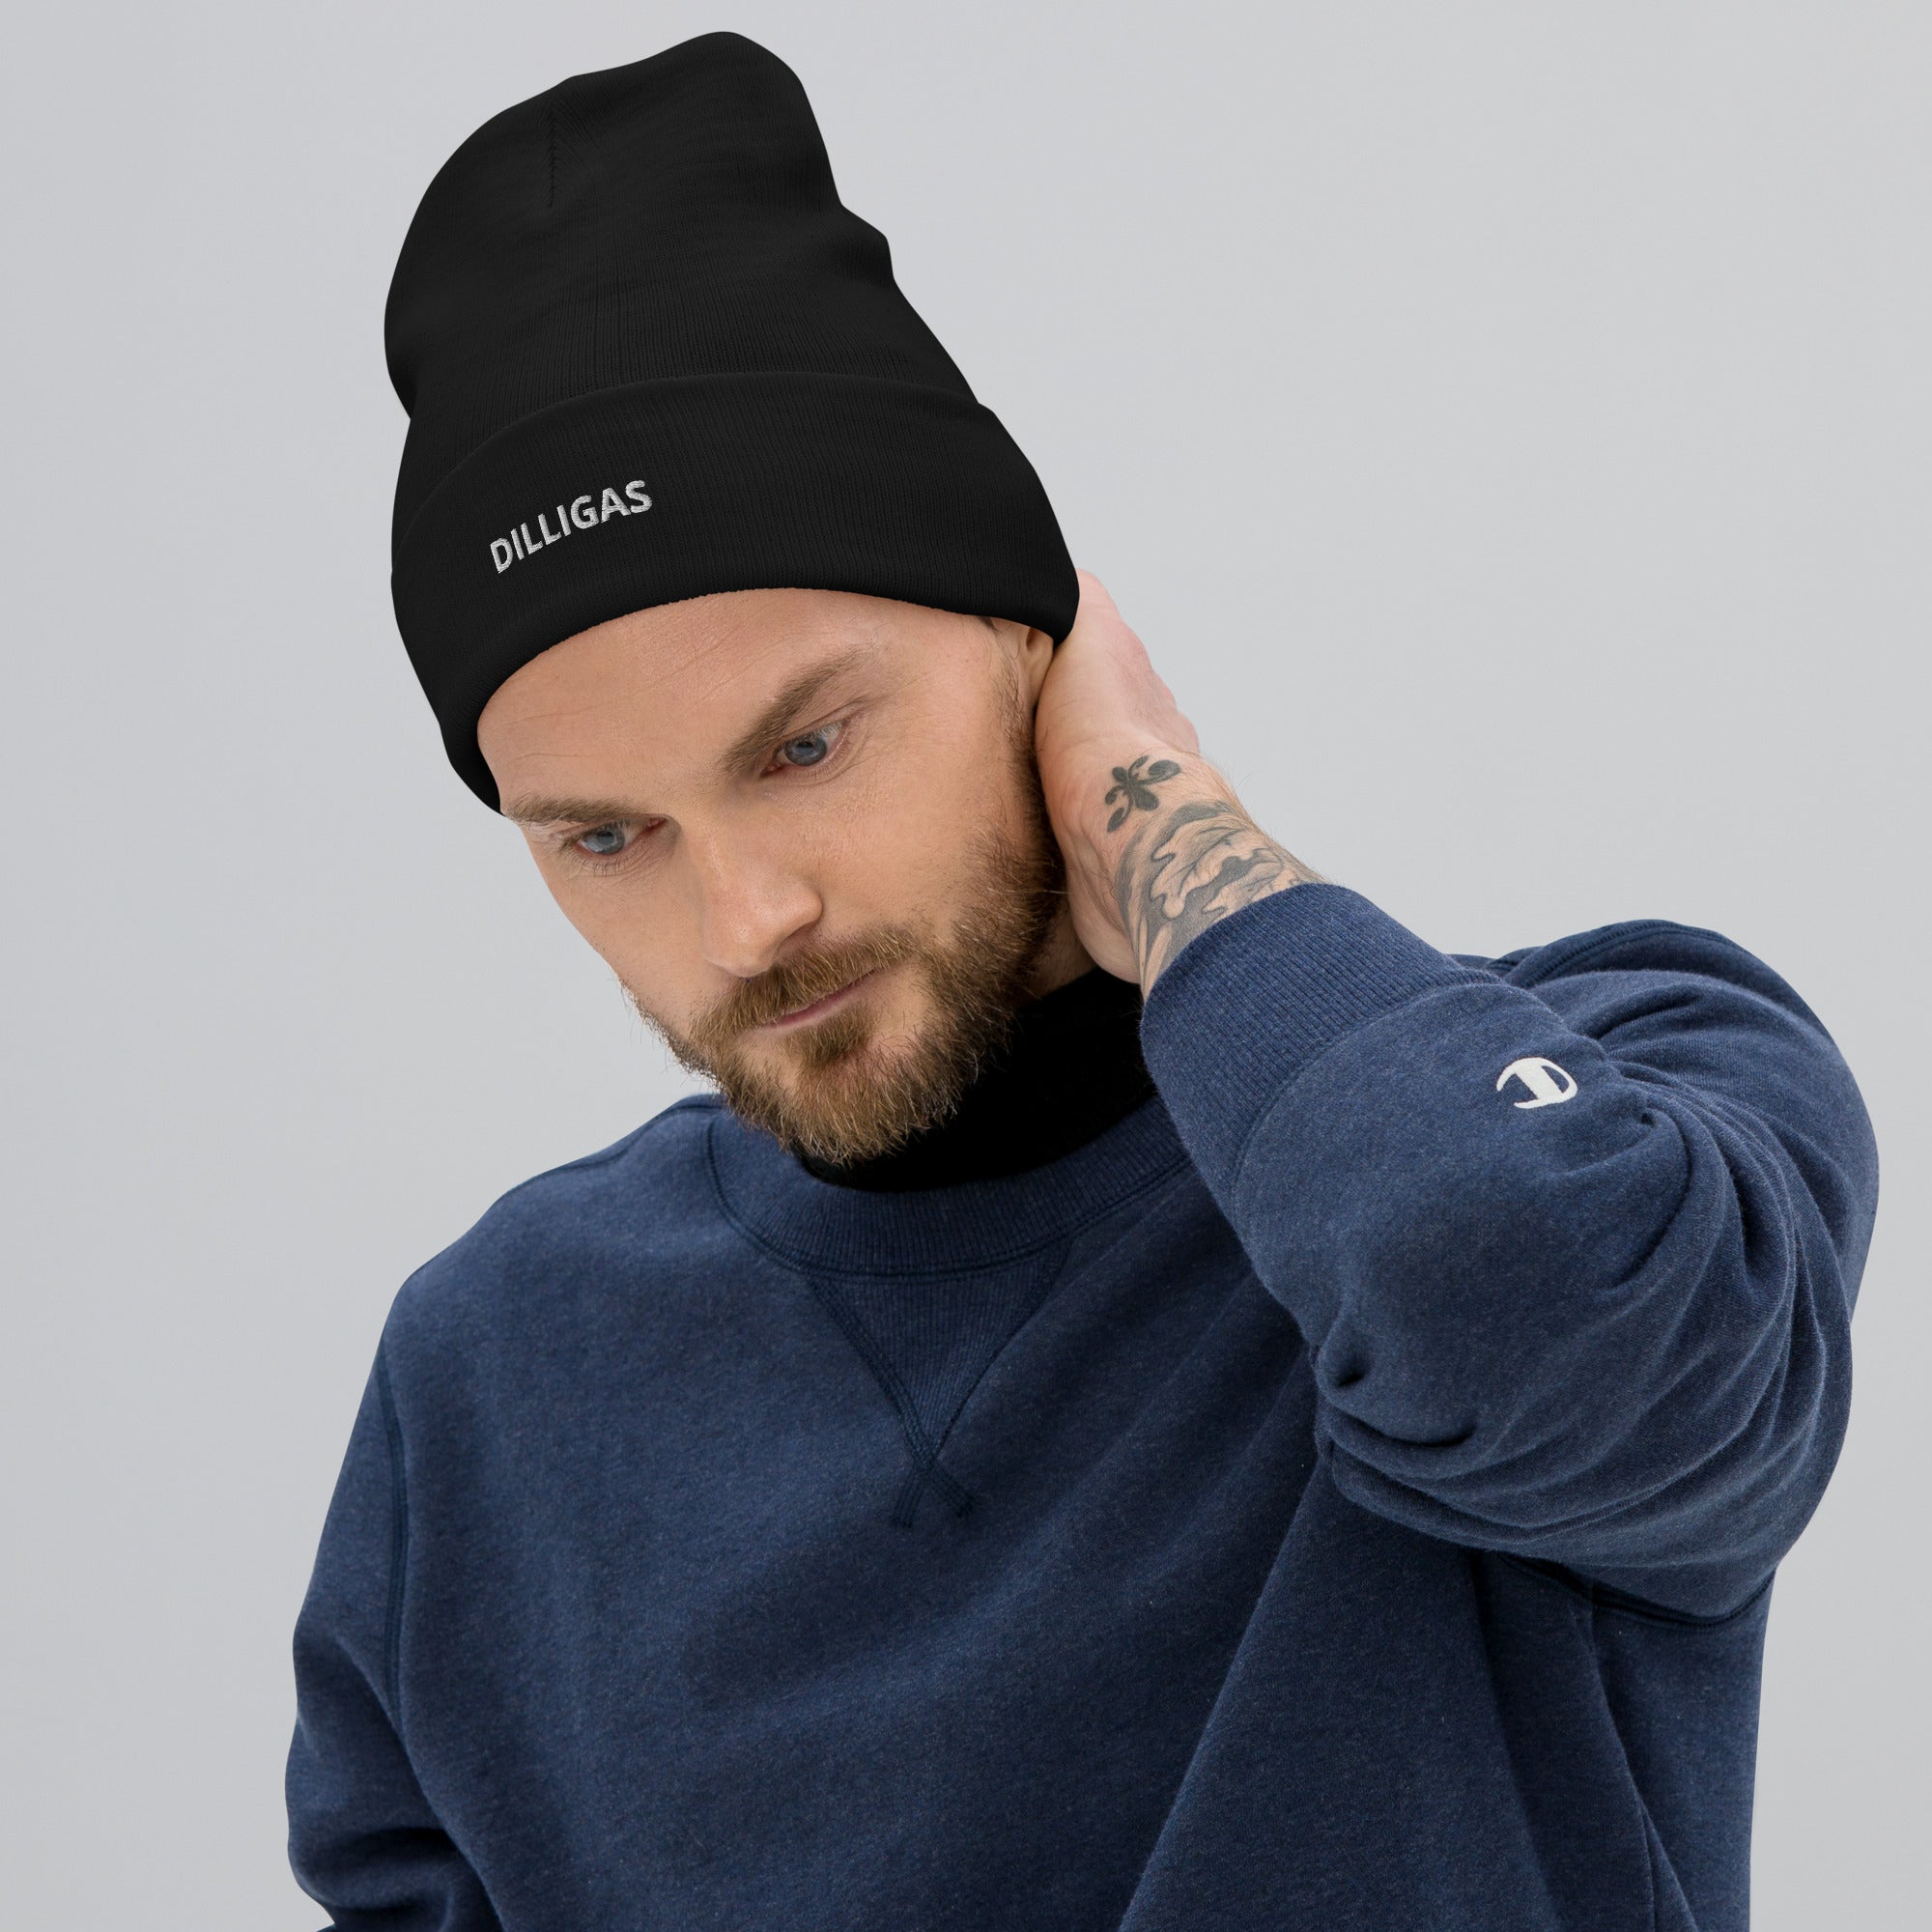 DILLAGAS - Embroidered Beanie